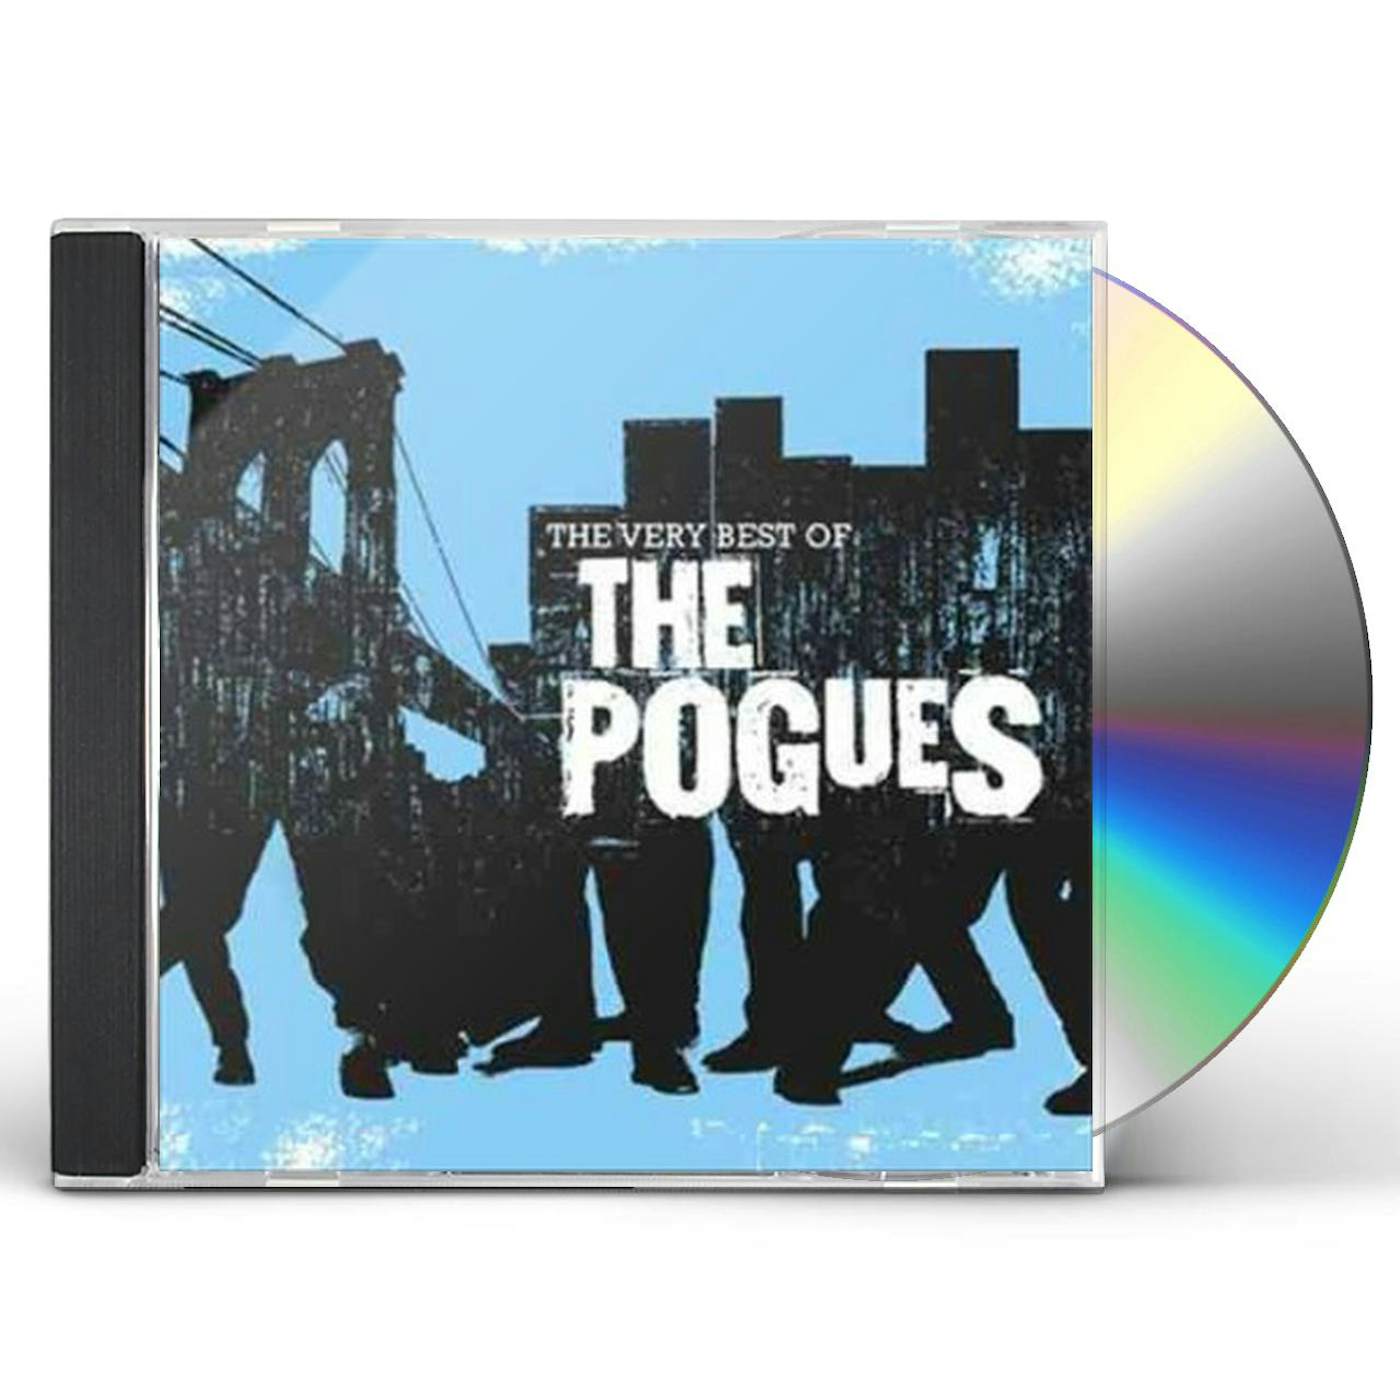 VERY BEST OF THE POGUES CD